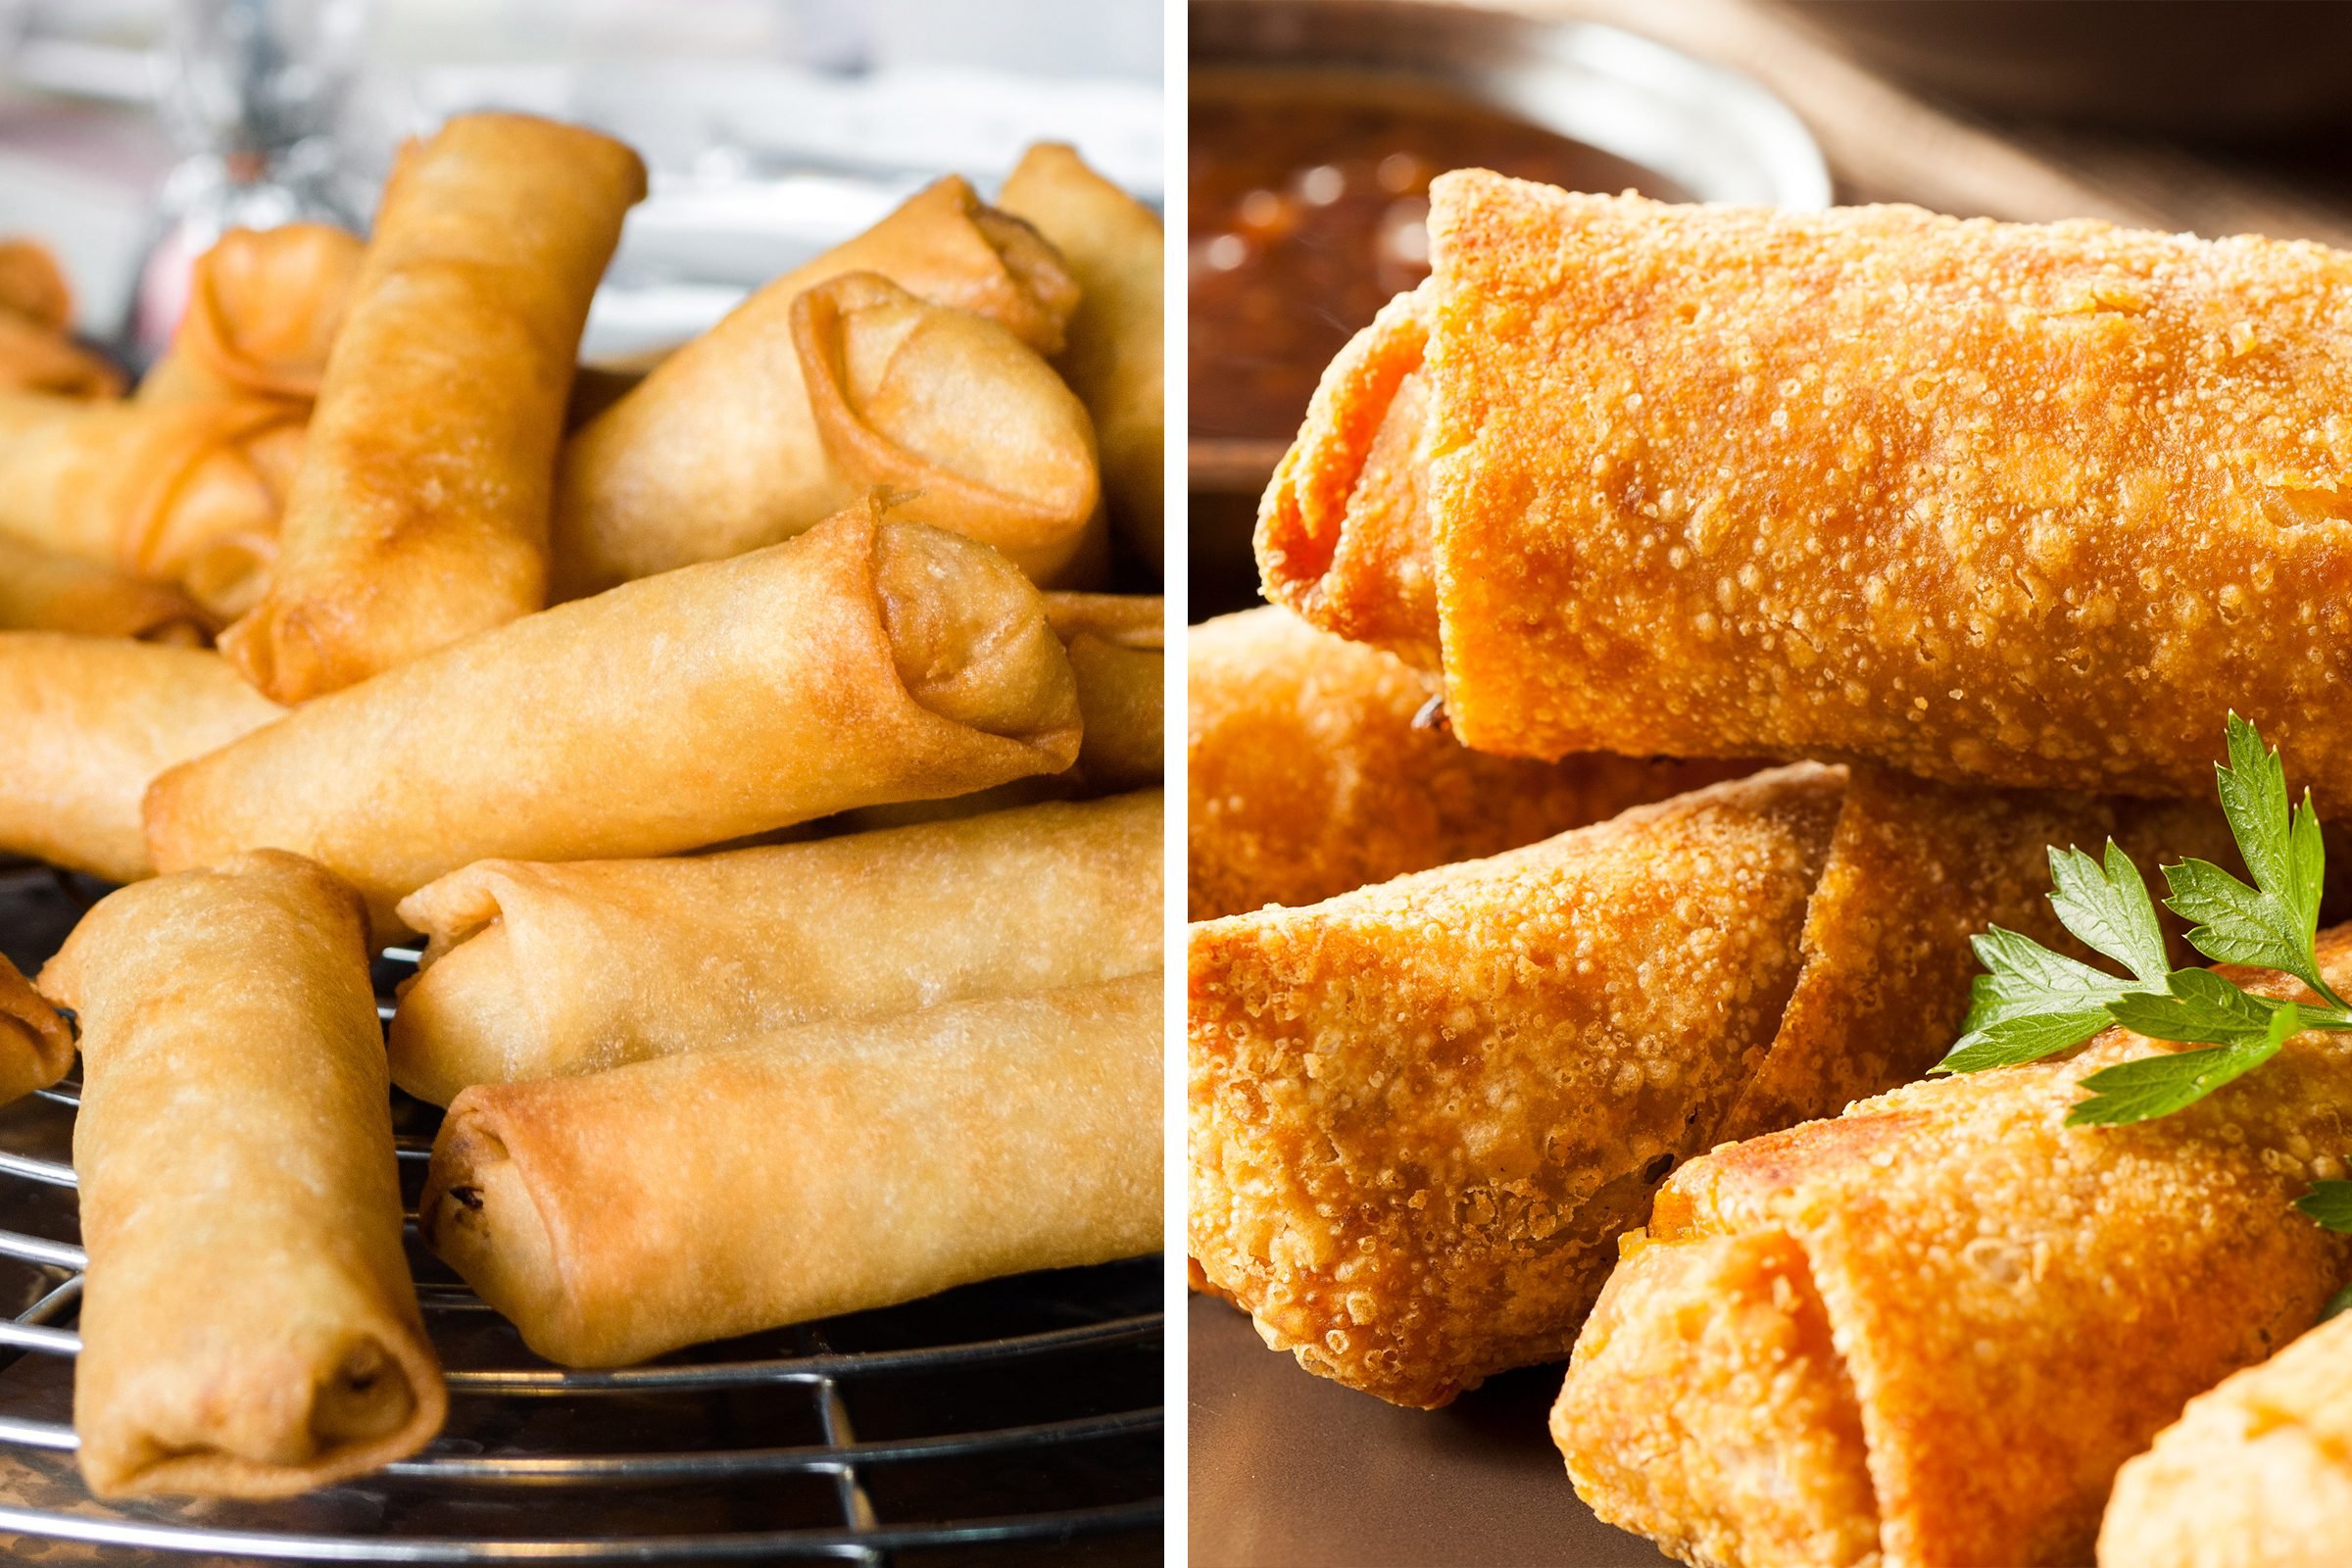 Dynasty Egg Roll / Spring Roll Wrappers